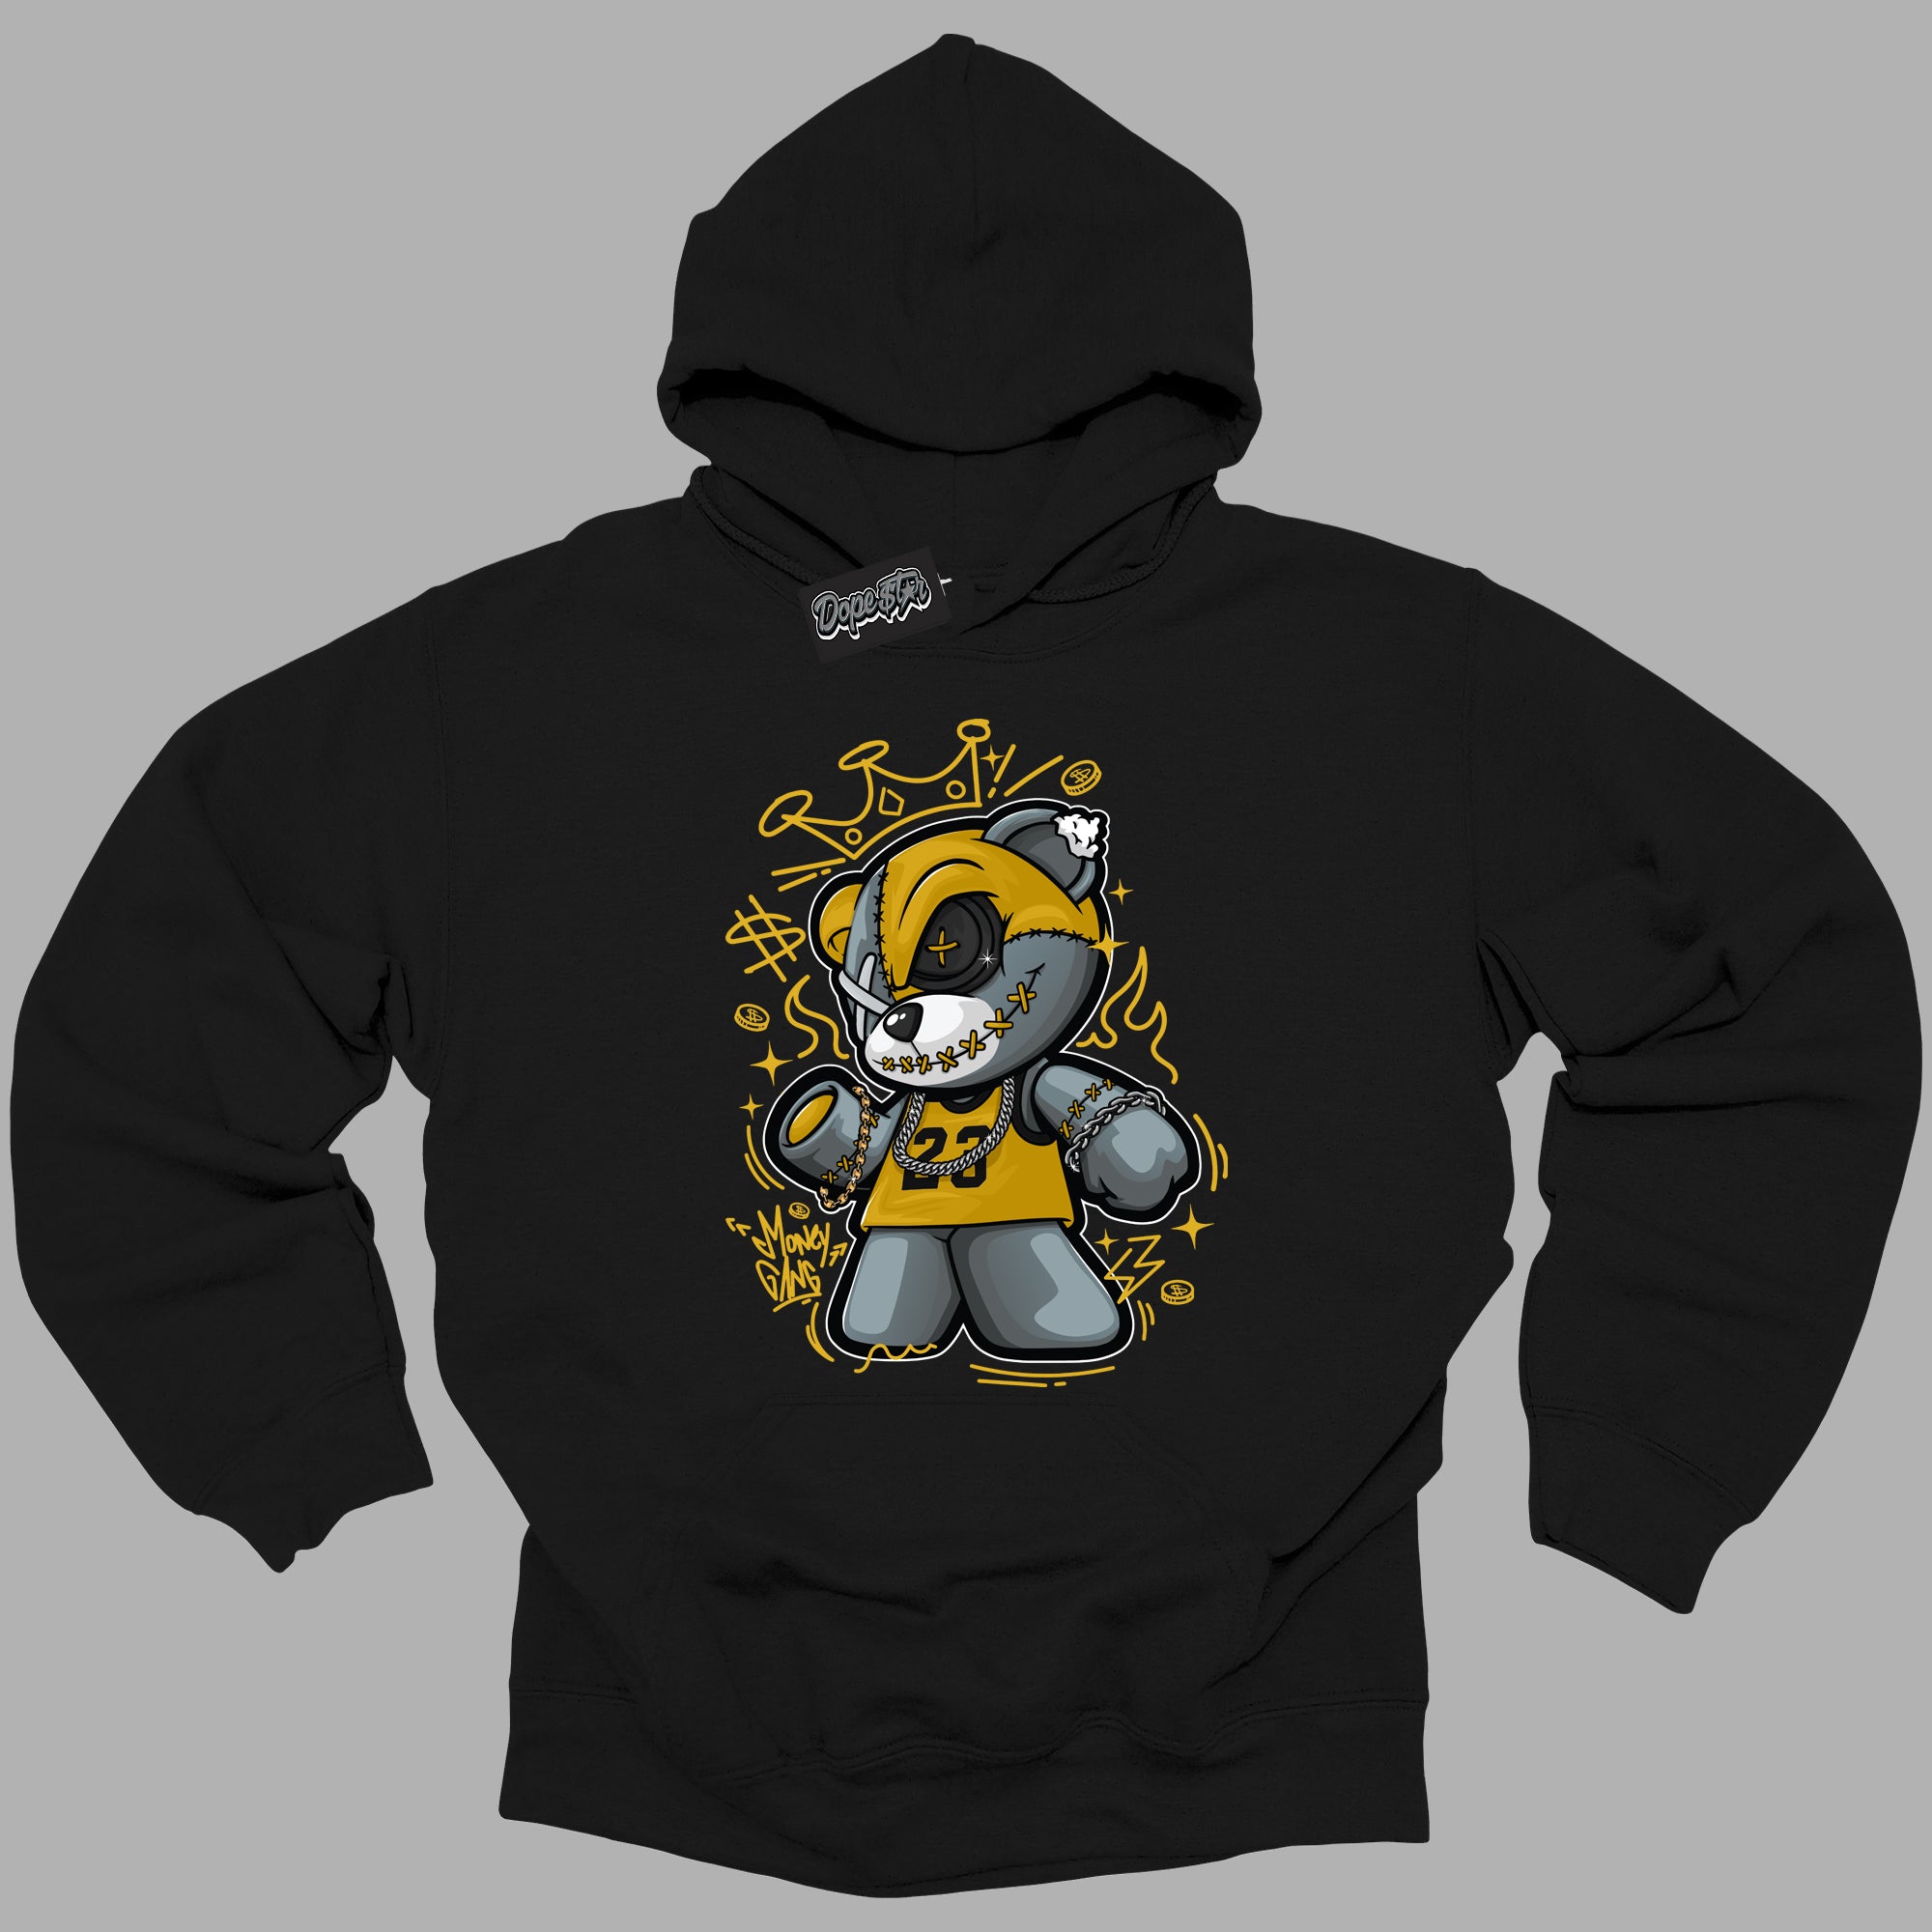 Cool Black Hoodie with “ Money Gang Bear ”  design that Perfectly Matches Yellow Ochre 6s Sneakers.